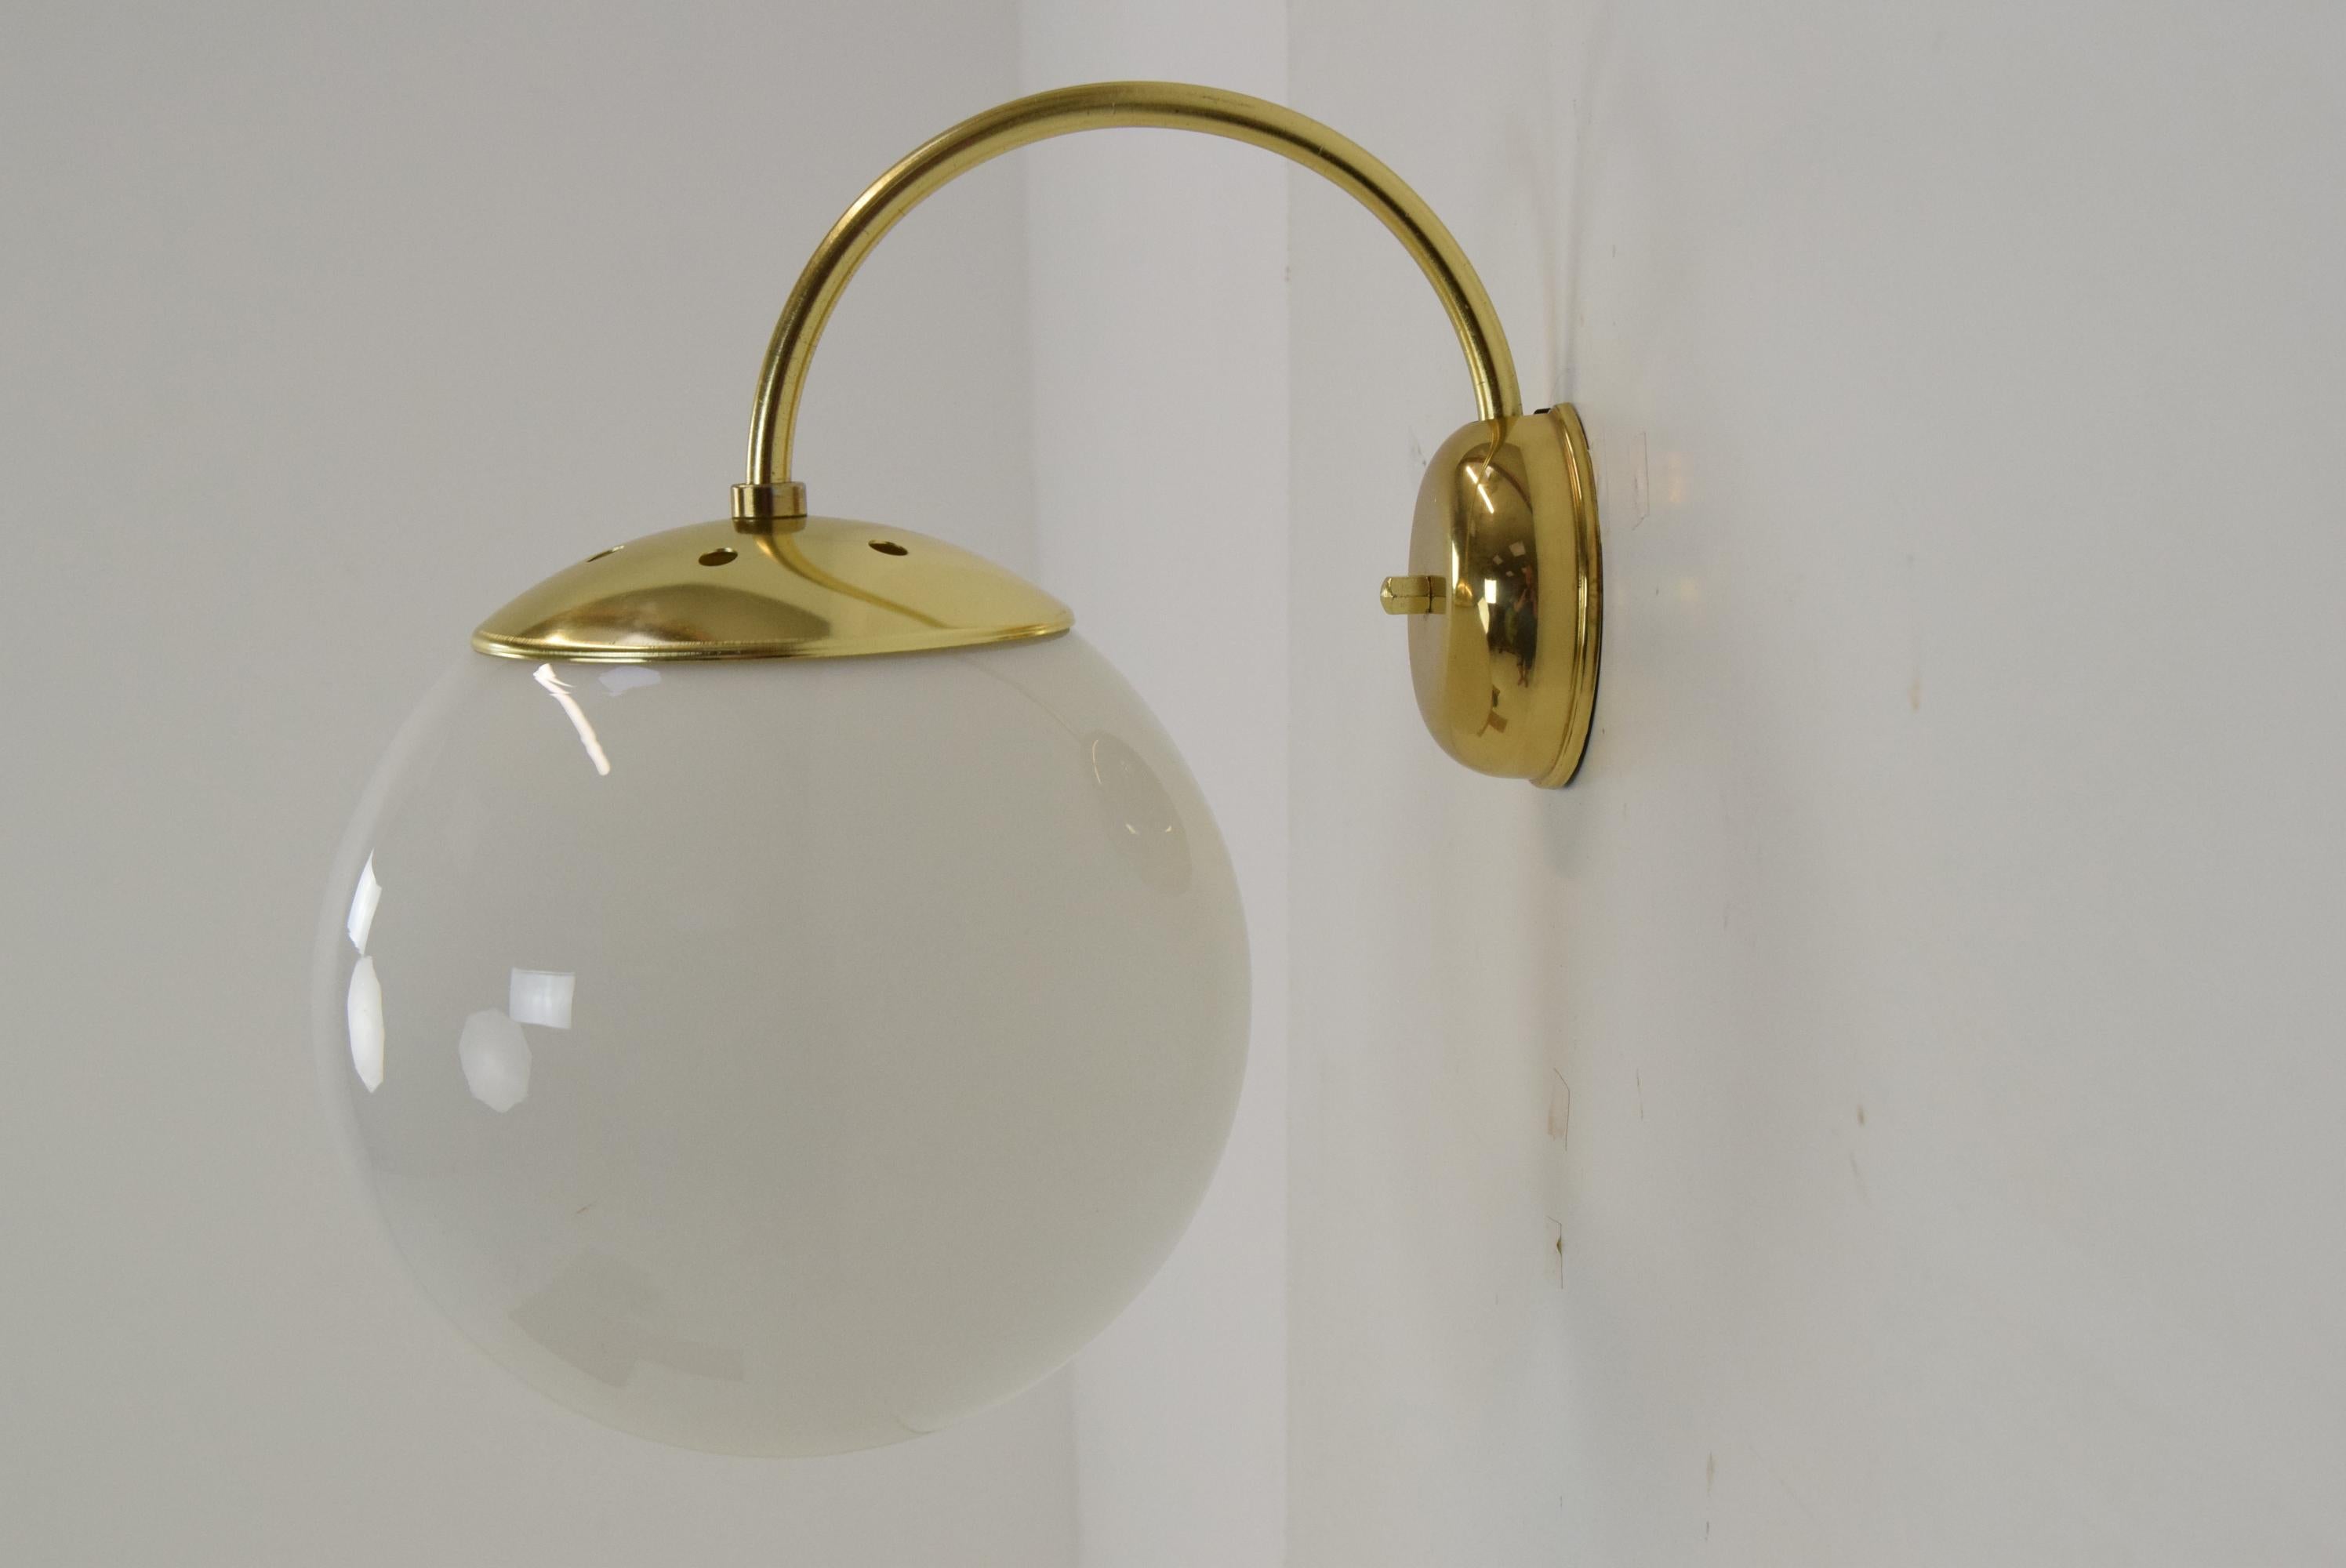 Made in Czechoslovakia
Made of Glass,Brass
1x E27 or E26 bulb
Re-polished
Fully Functional
Good Original condition
US wiring compatible